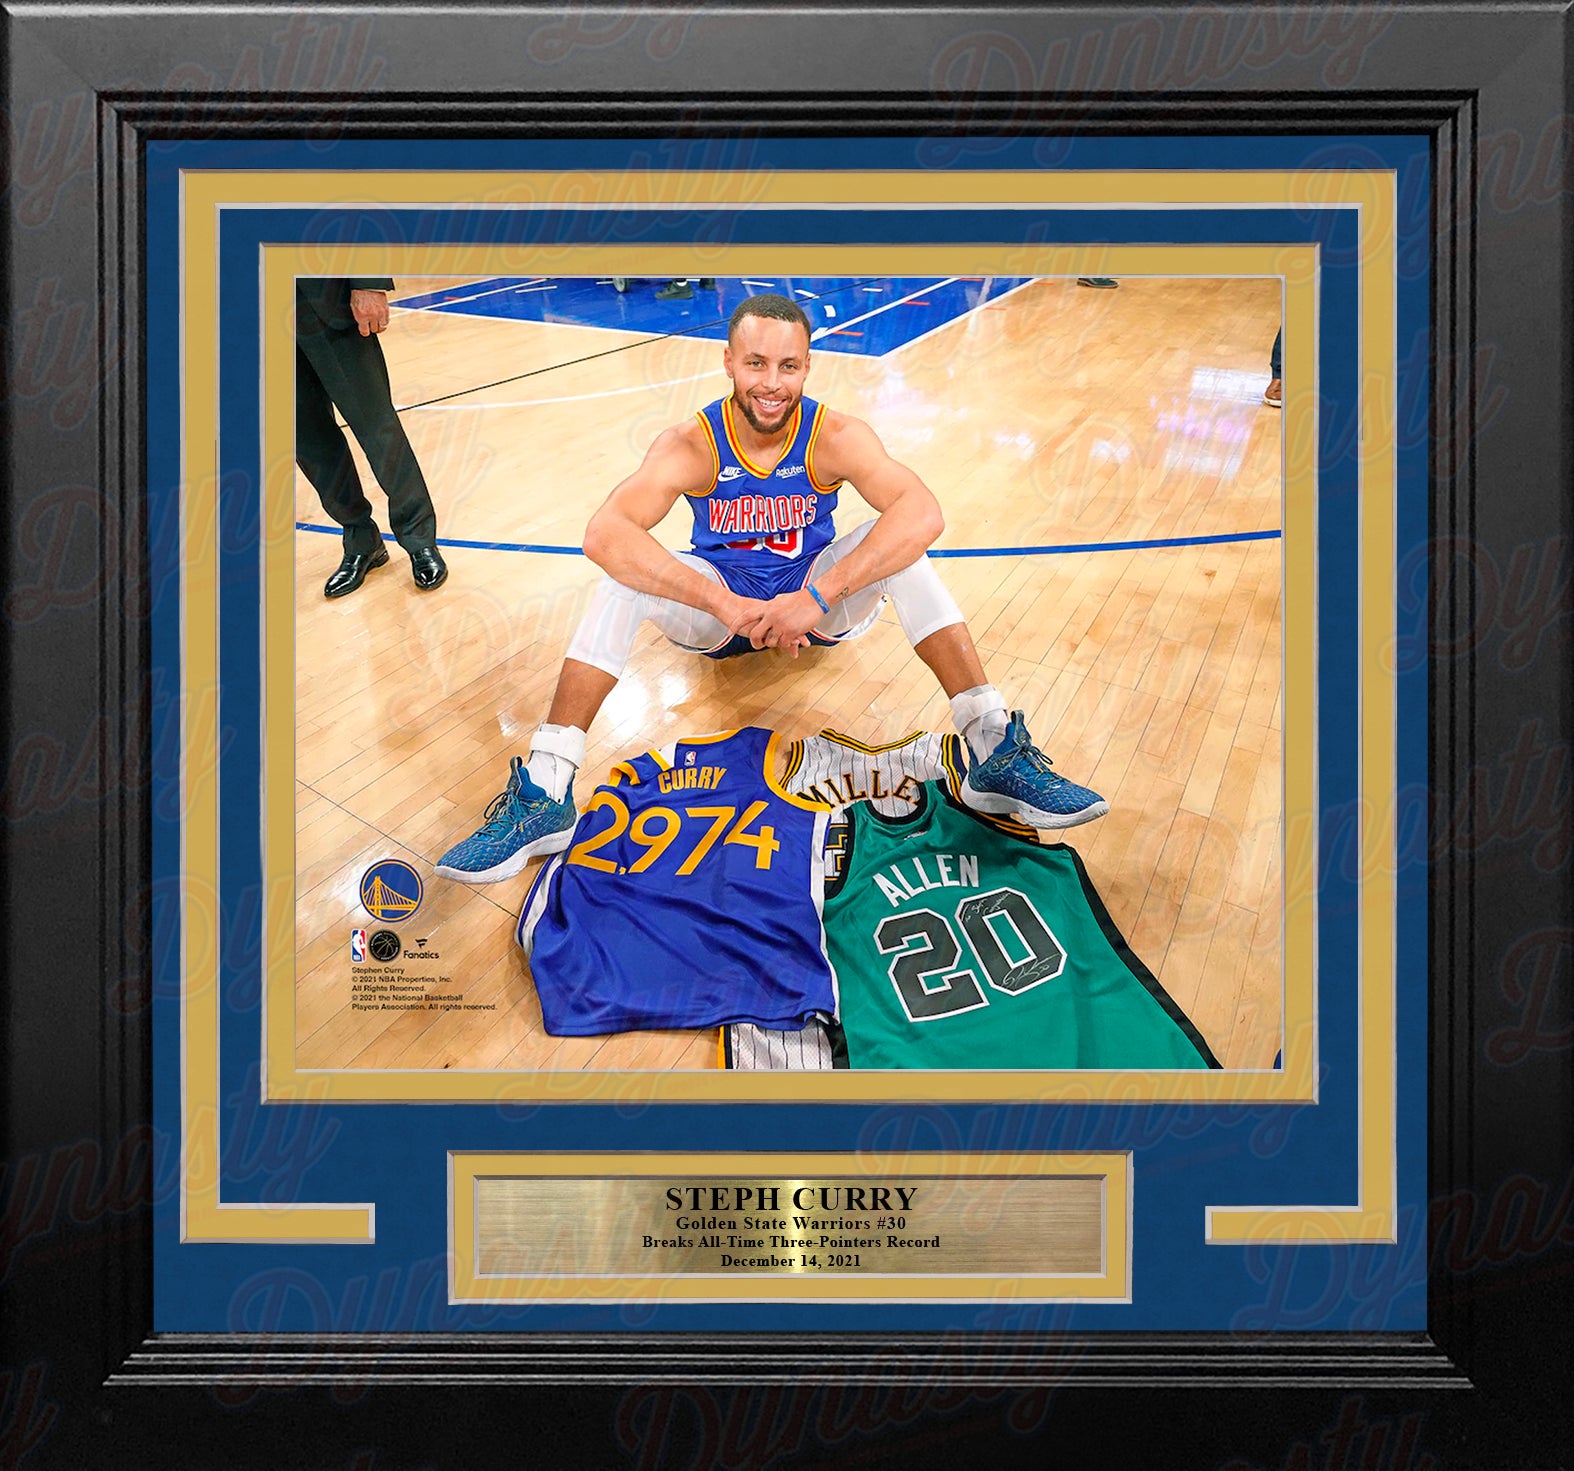 Steph Curry with 3-Point Record Jerseys Golden State Warriors 8" x 10" Framed Basketball Photo - Dynasty Sports & Framing 